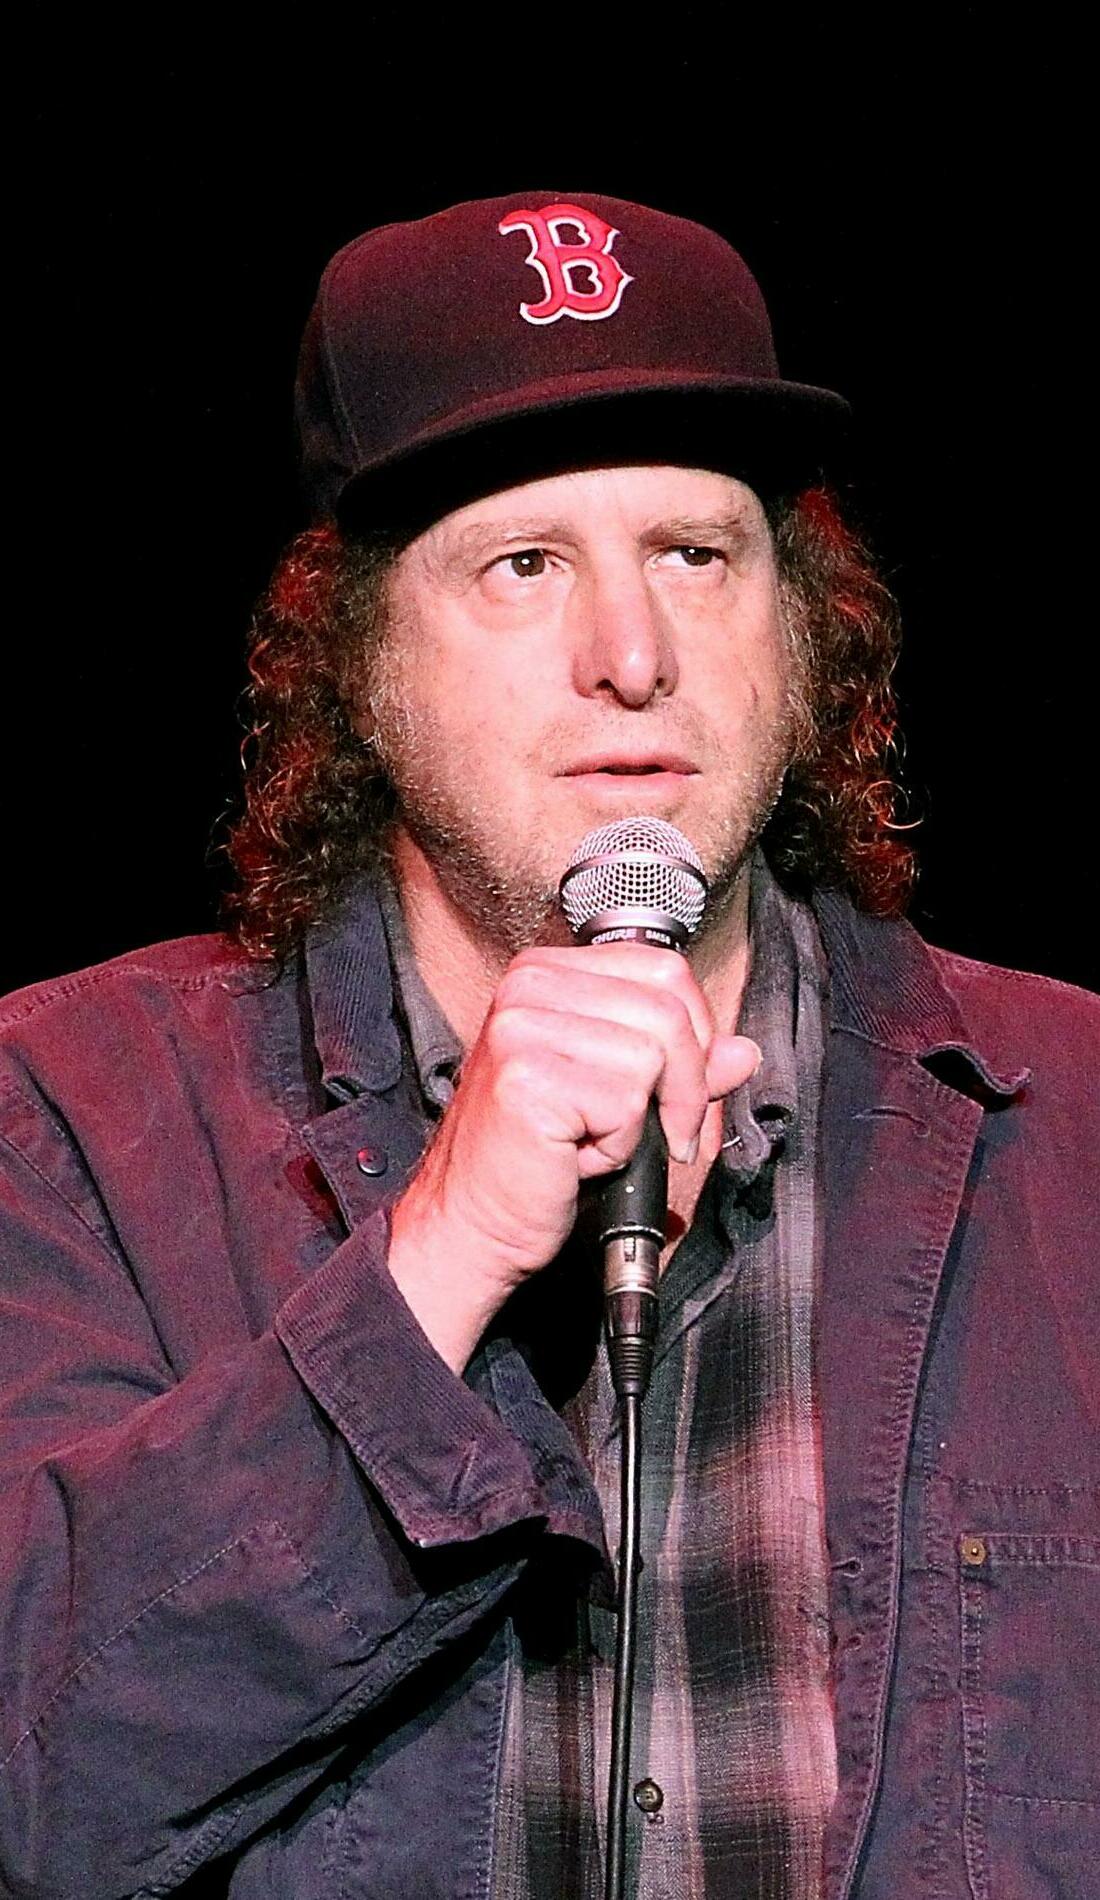 A Steven Wright live event